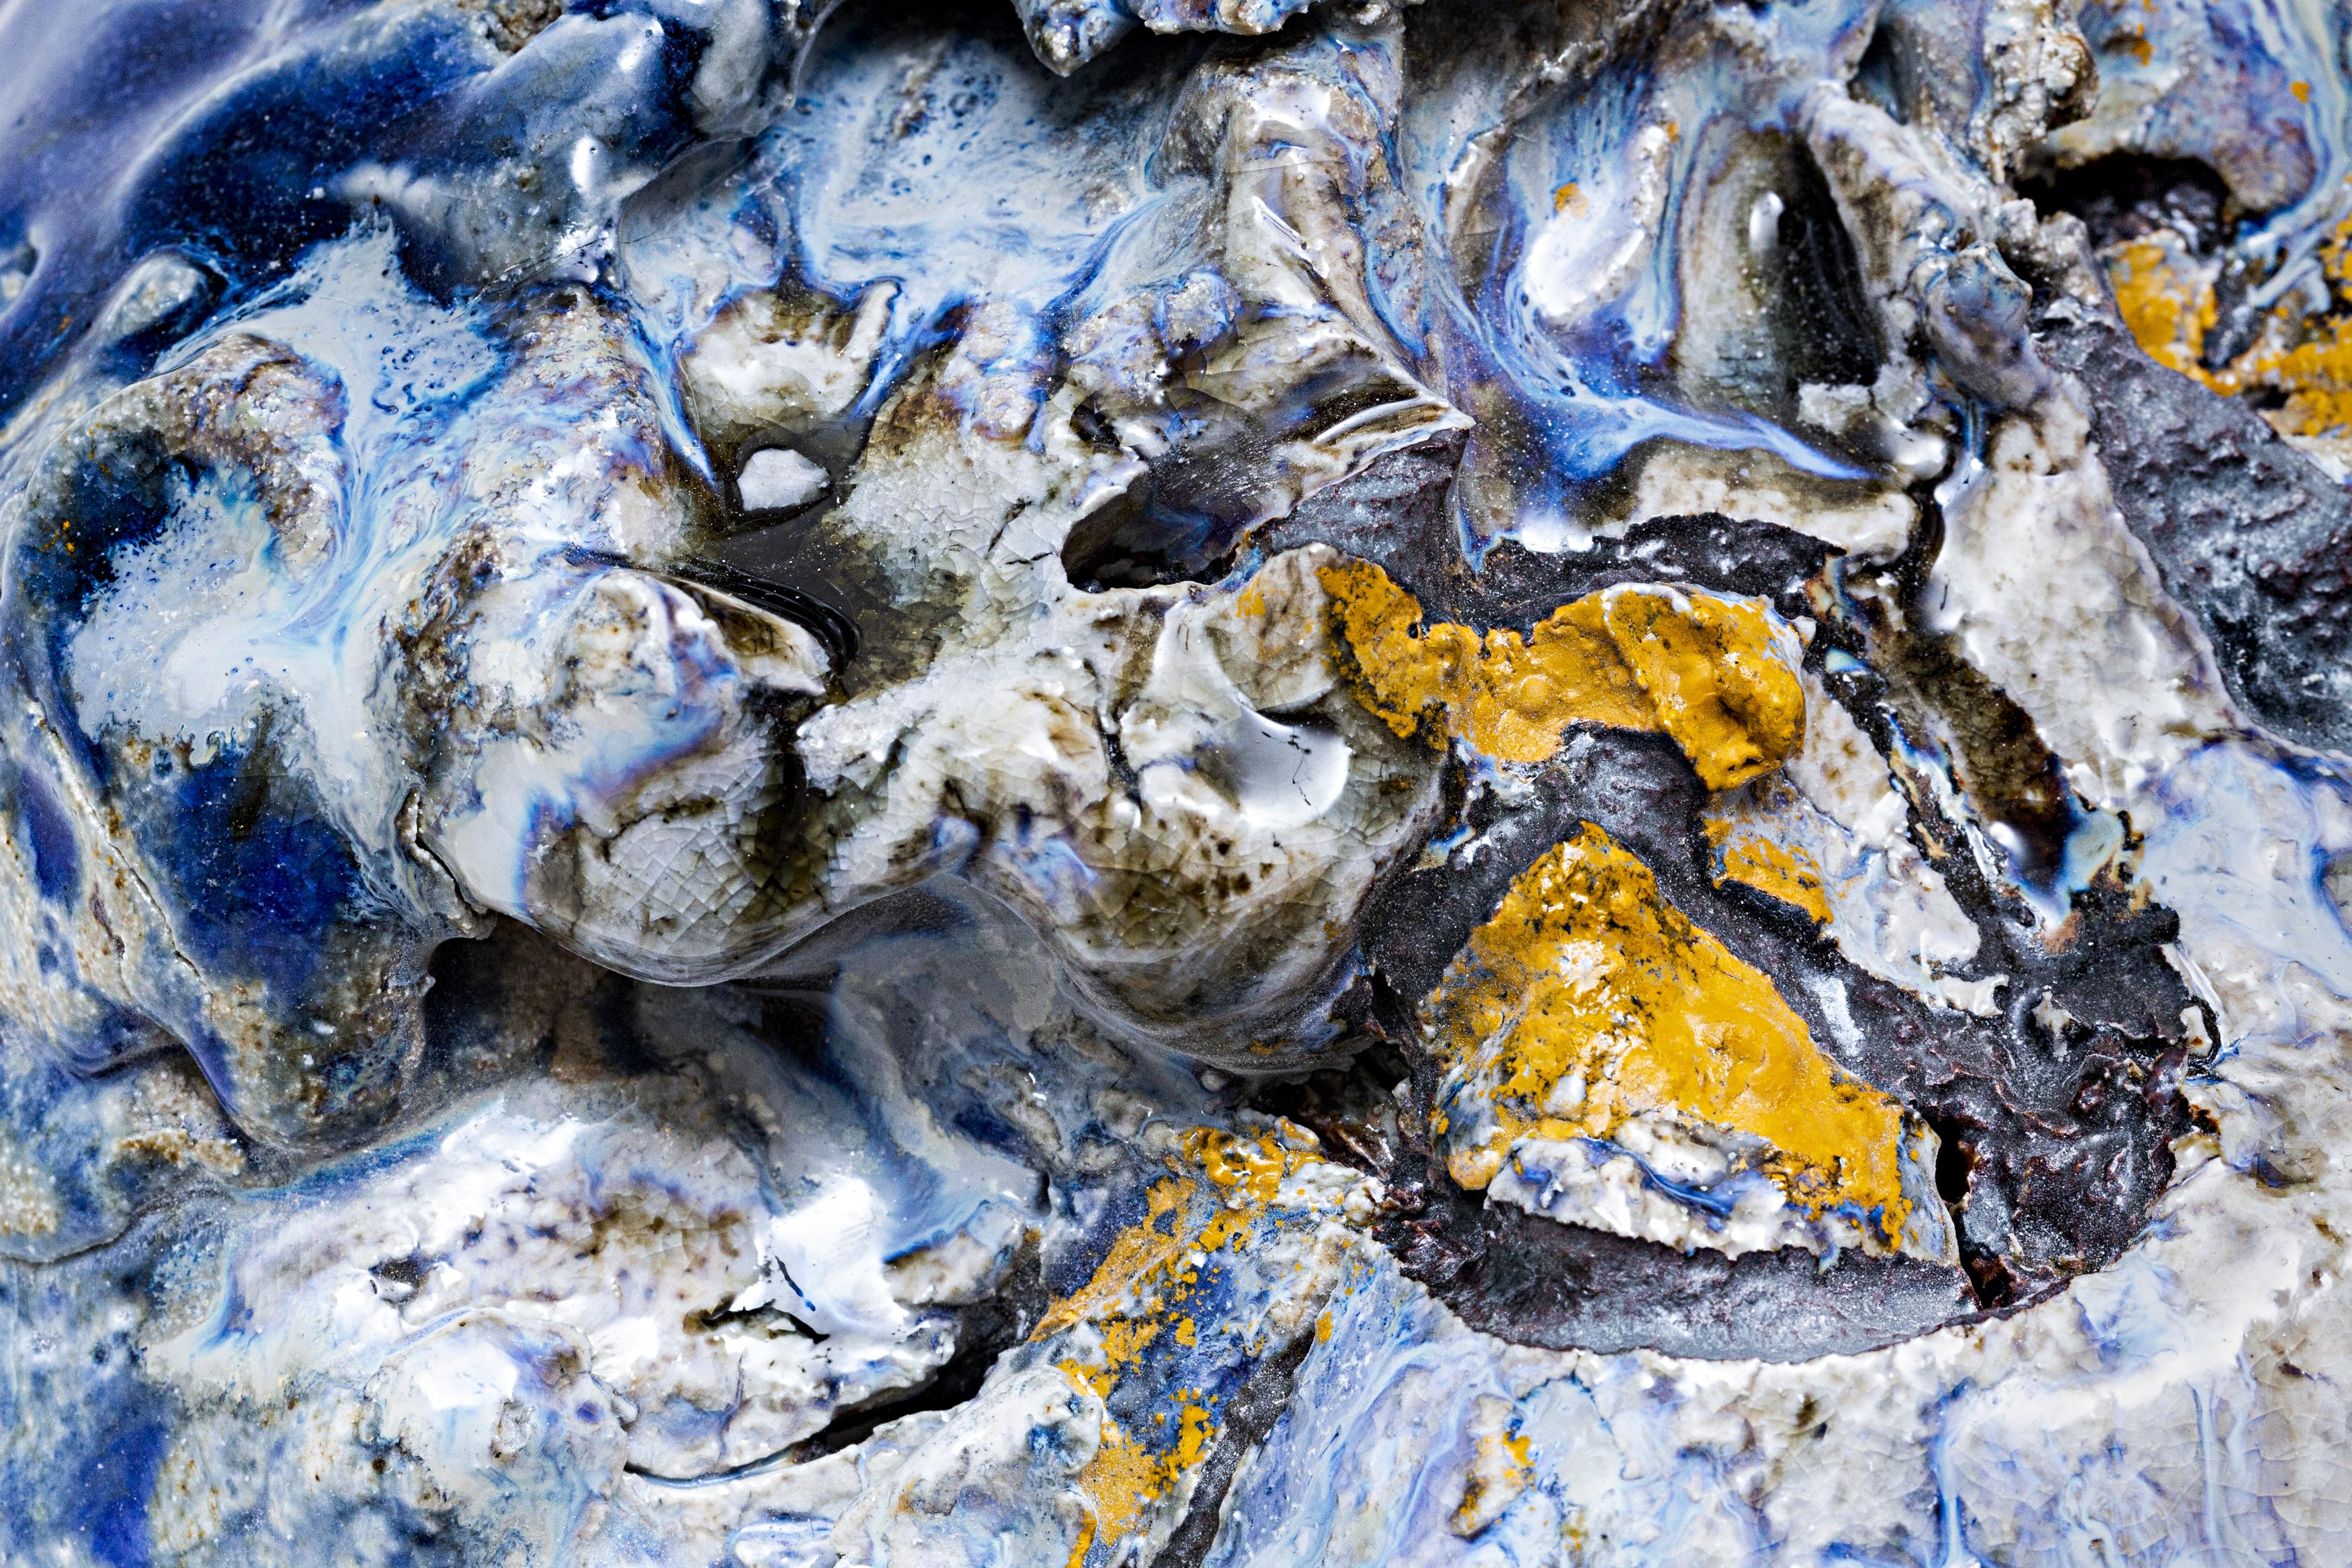 Detailed photograph of blue and yellow glazes on a textured ceramic surface